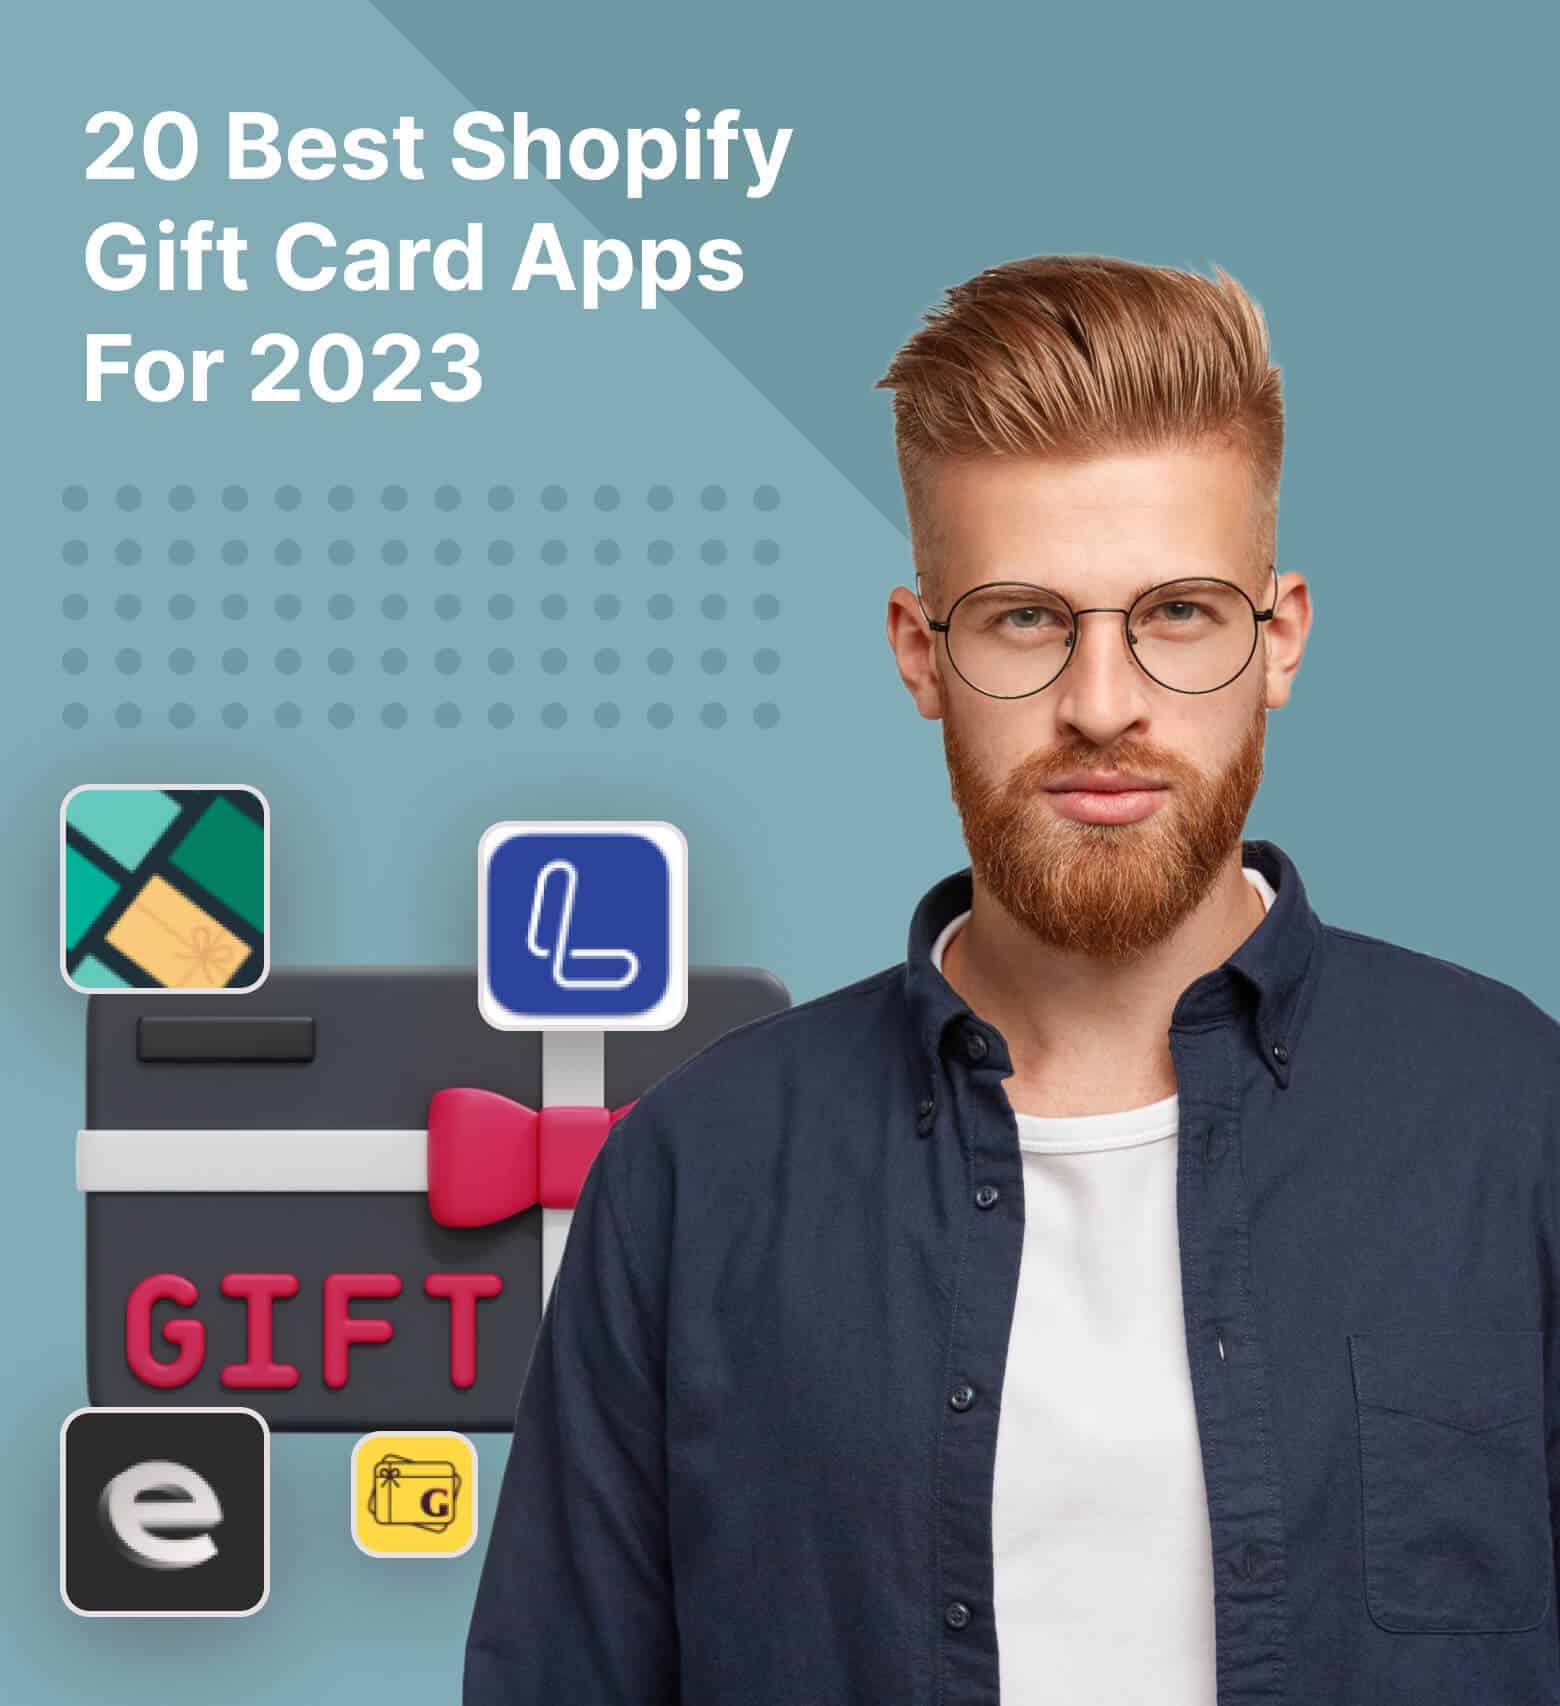 20 Best Shopify Gift Card Apps For